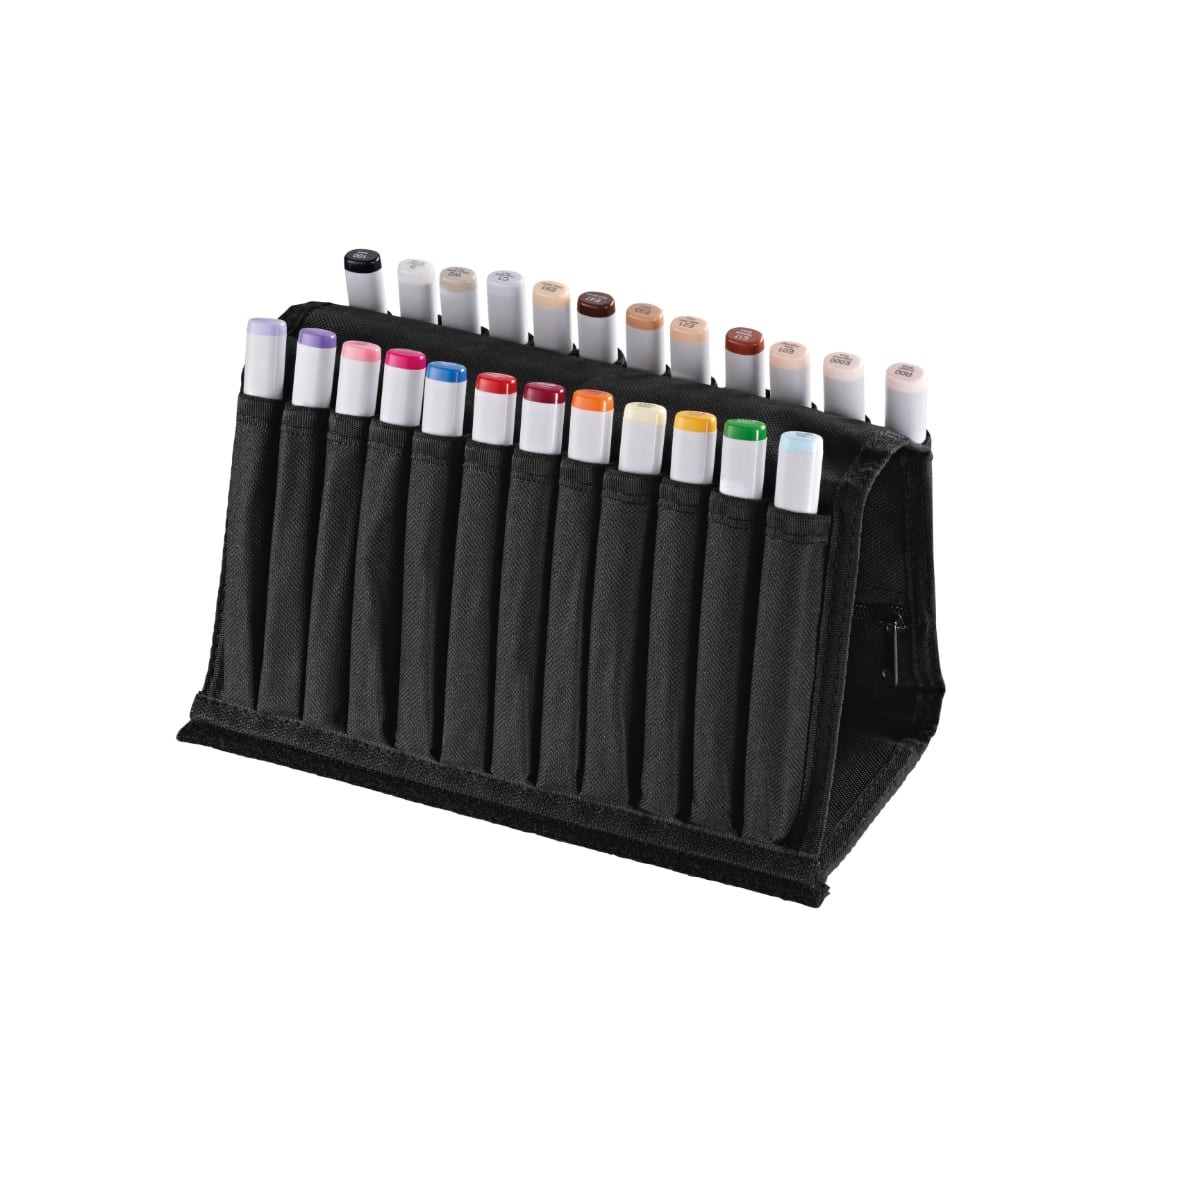 Copic Sketch 24 colors Starter set in a Wallet